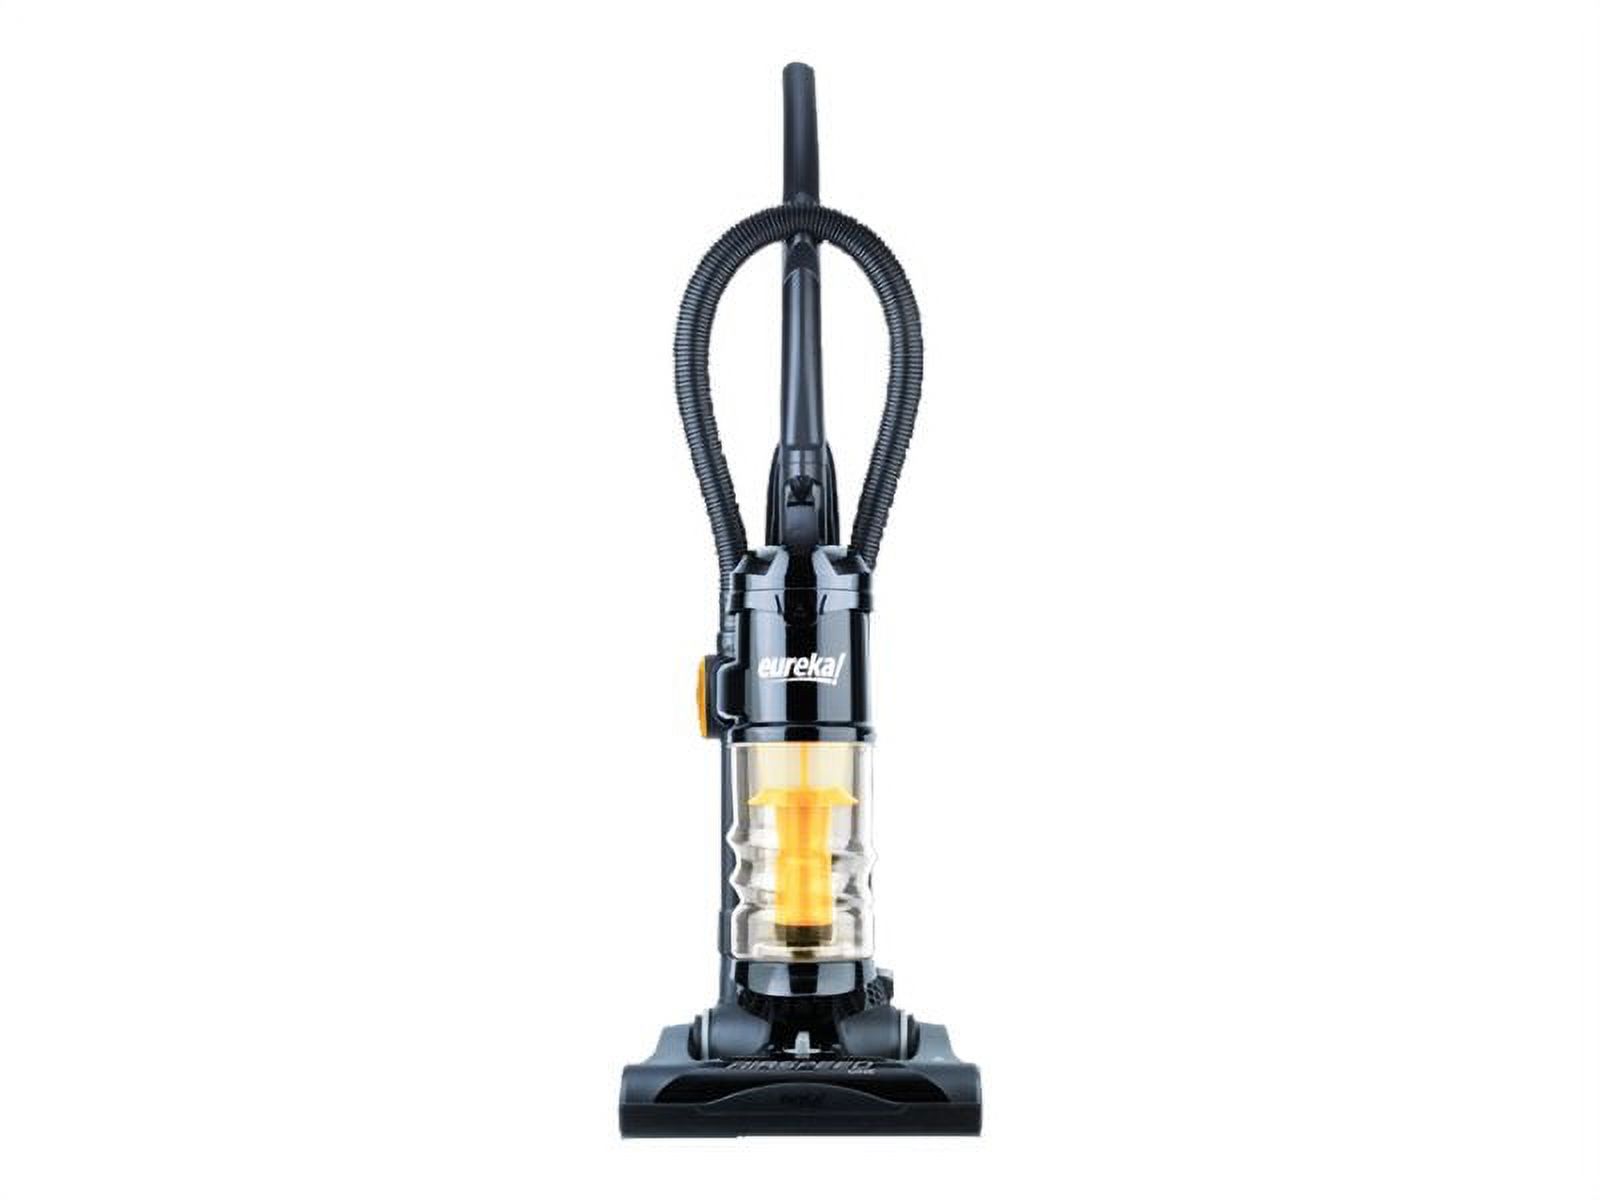 Eureka AirSpeed ONE AS2013A - Vacuum cleaner - upright - bagless - black/yellow - image 1 of 4